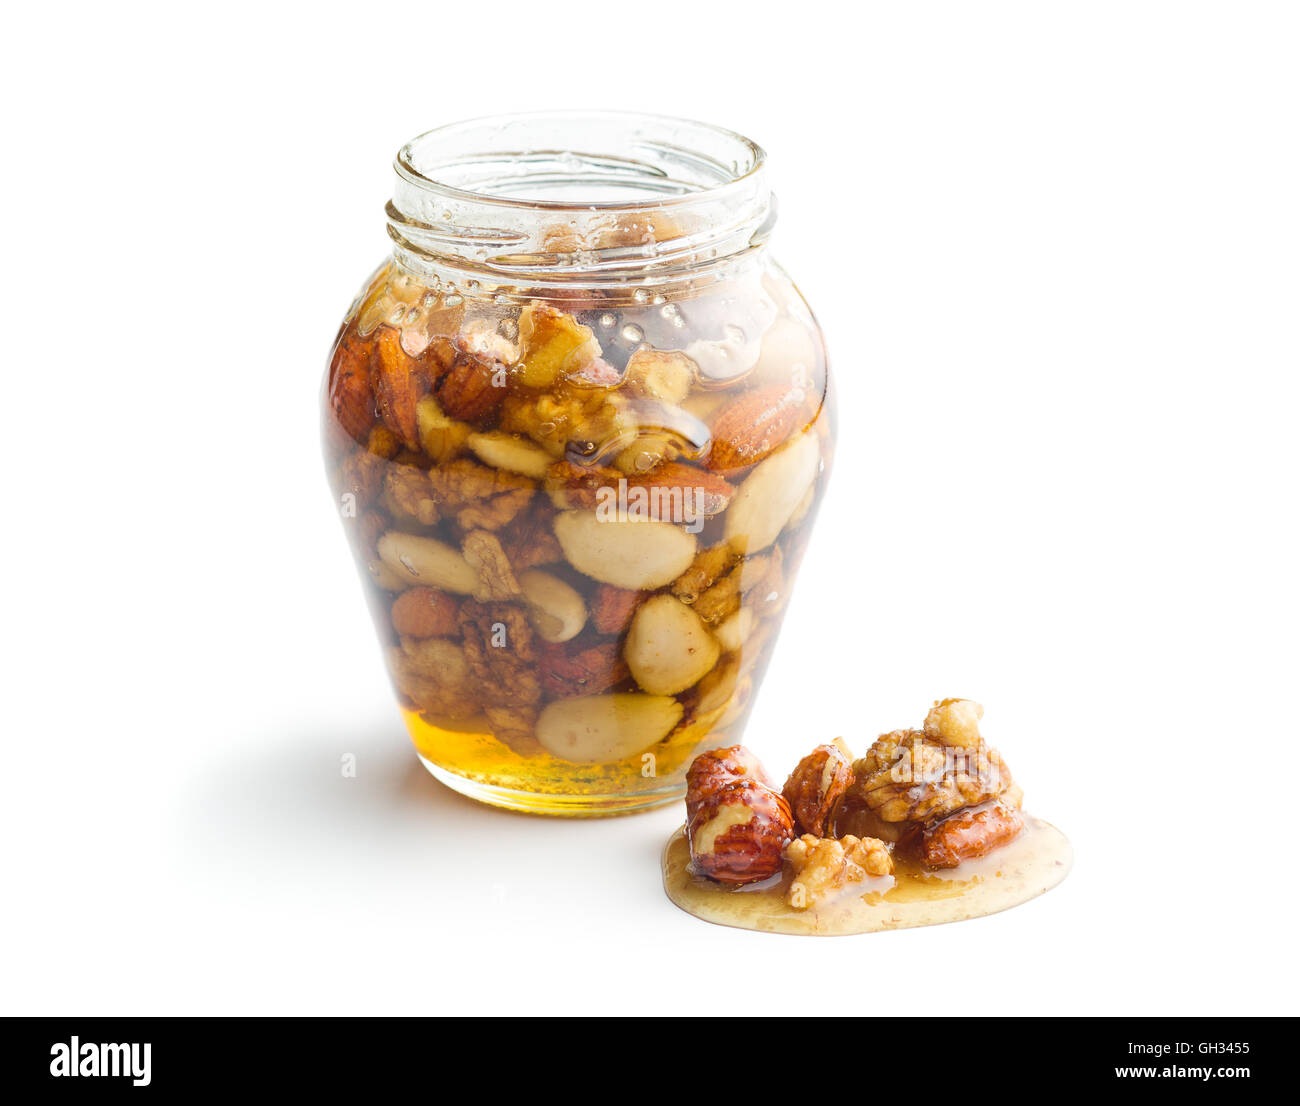 https://c8.alamy.com/comp/GH3455/honey-and-nuts-in-jar-isolated-on-white-background-GH3455.jpg